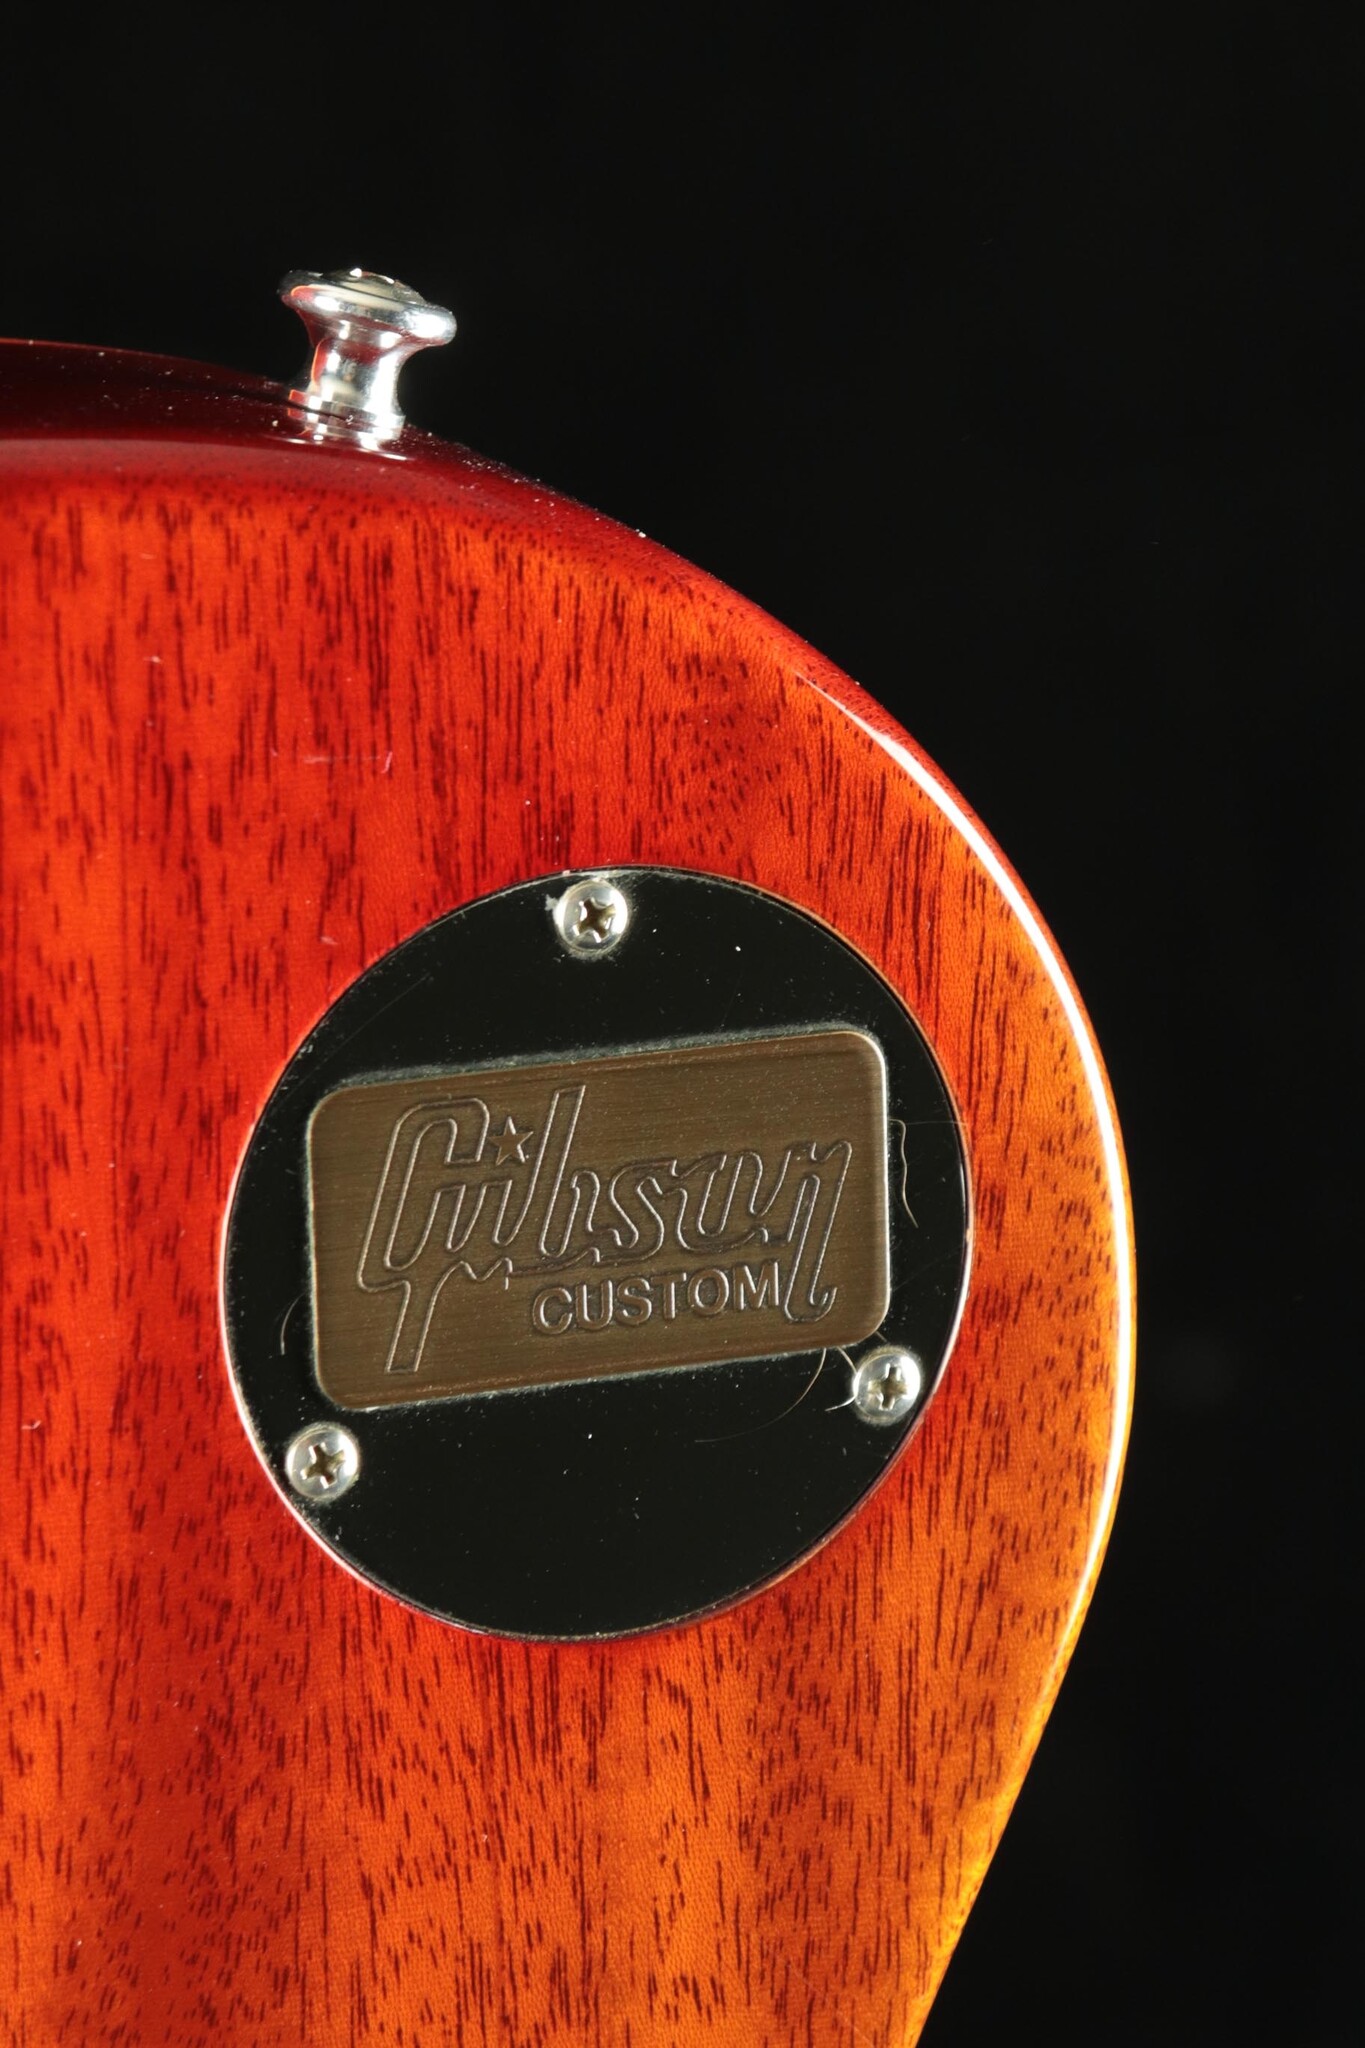 Gibson Gibson Custom Les Paul Standard 1960 Reissue - Washed Cherry